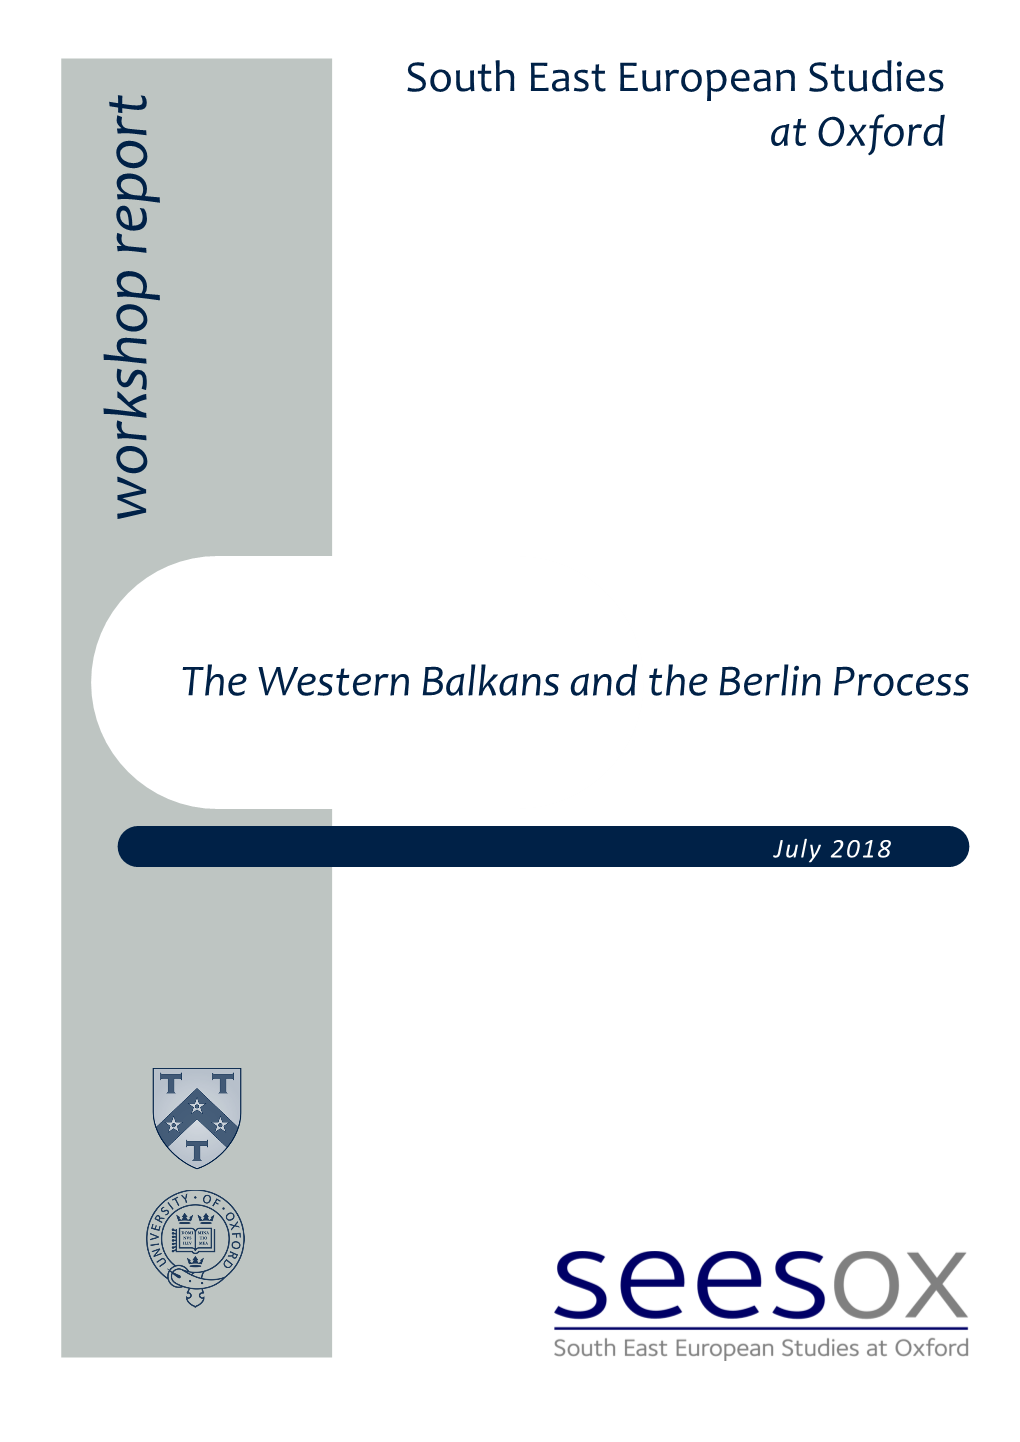 The Western Balkans and the Berlin Process